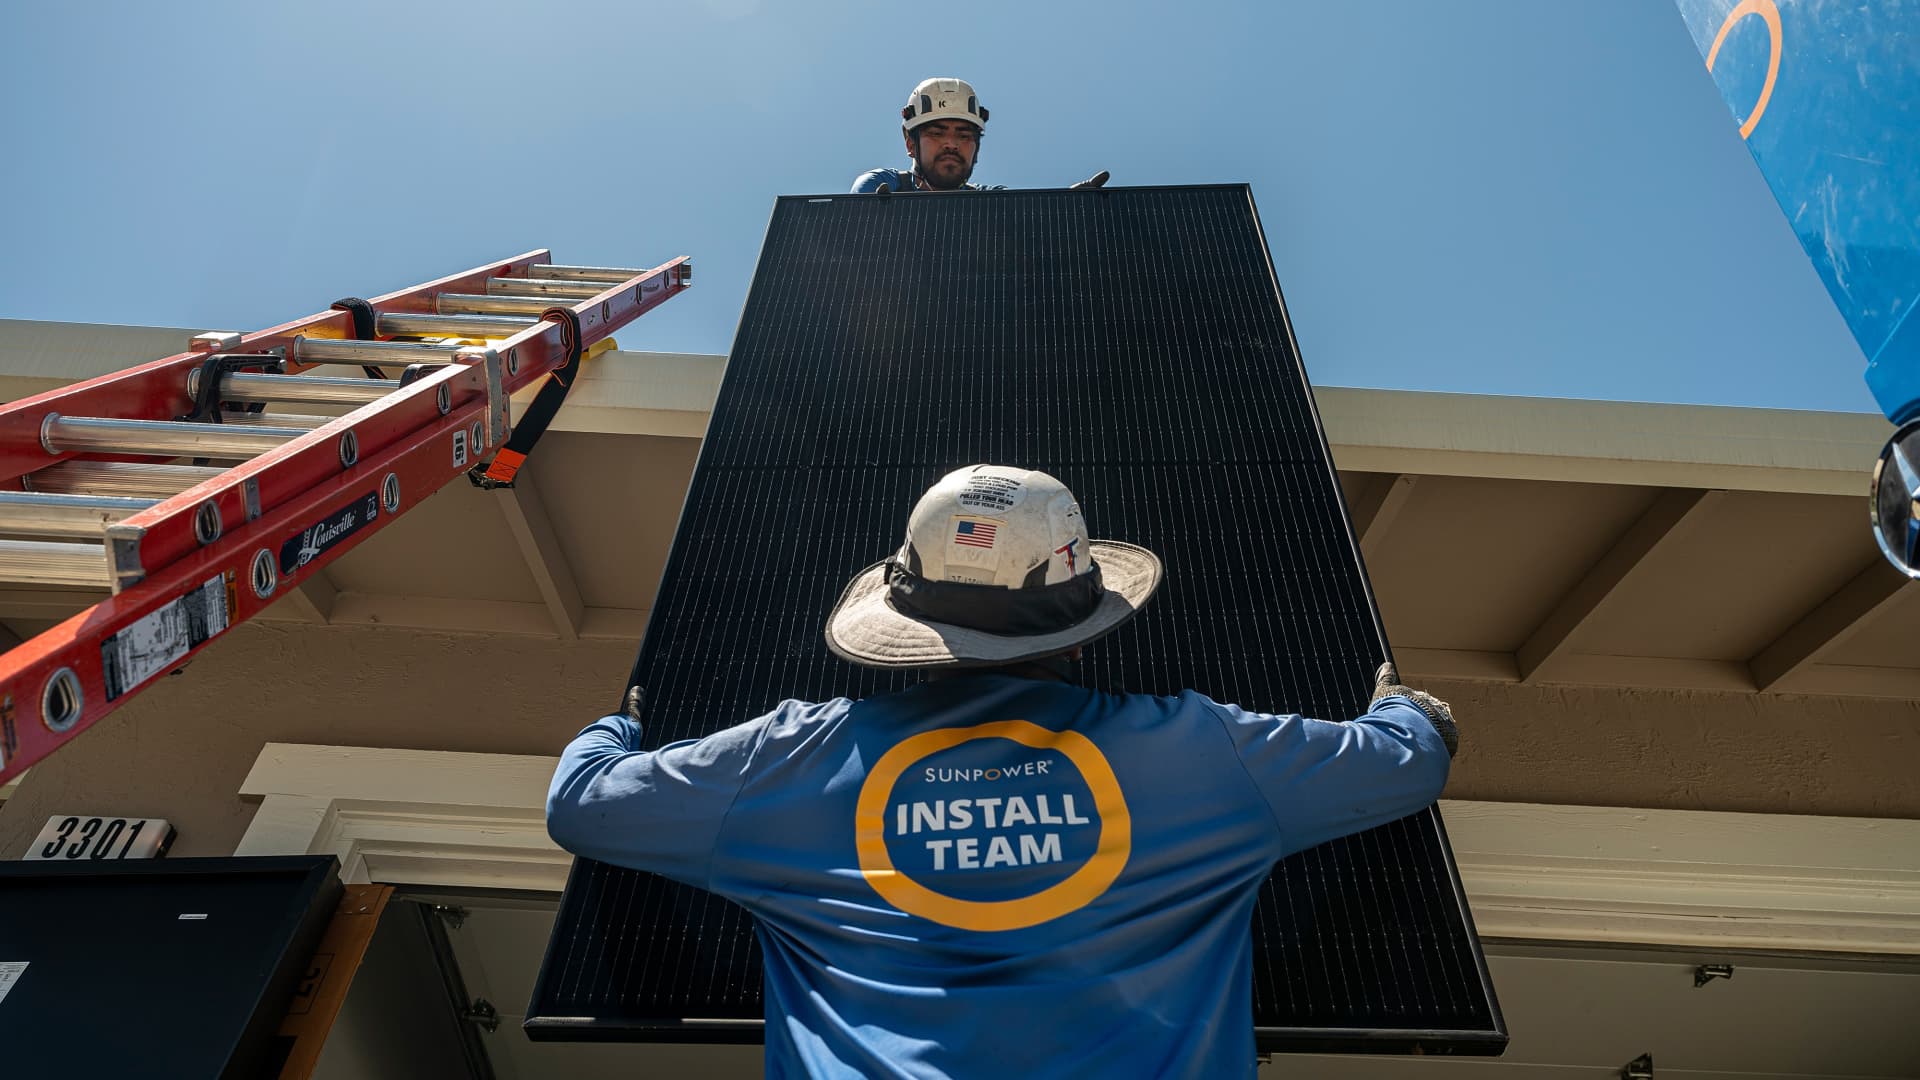 The bounce in long-suffering solar stocks could be for real, according to the charts